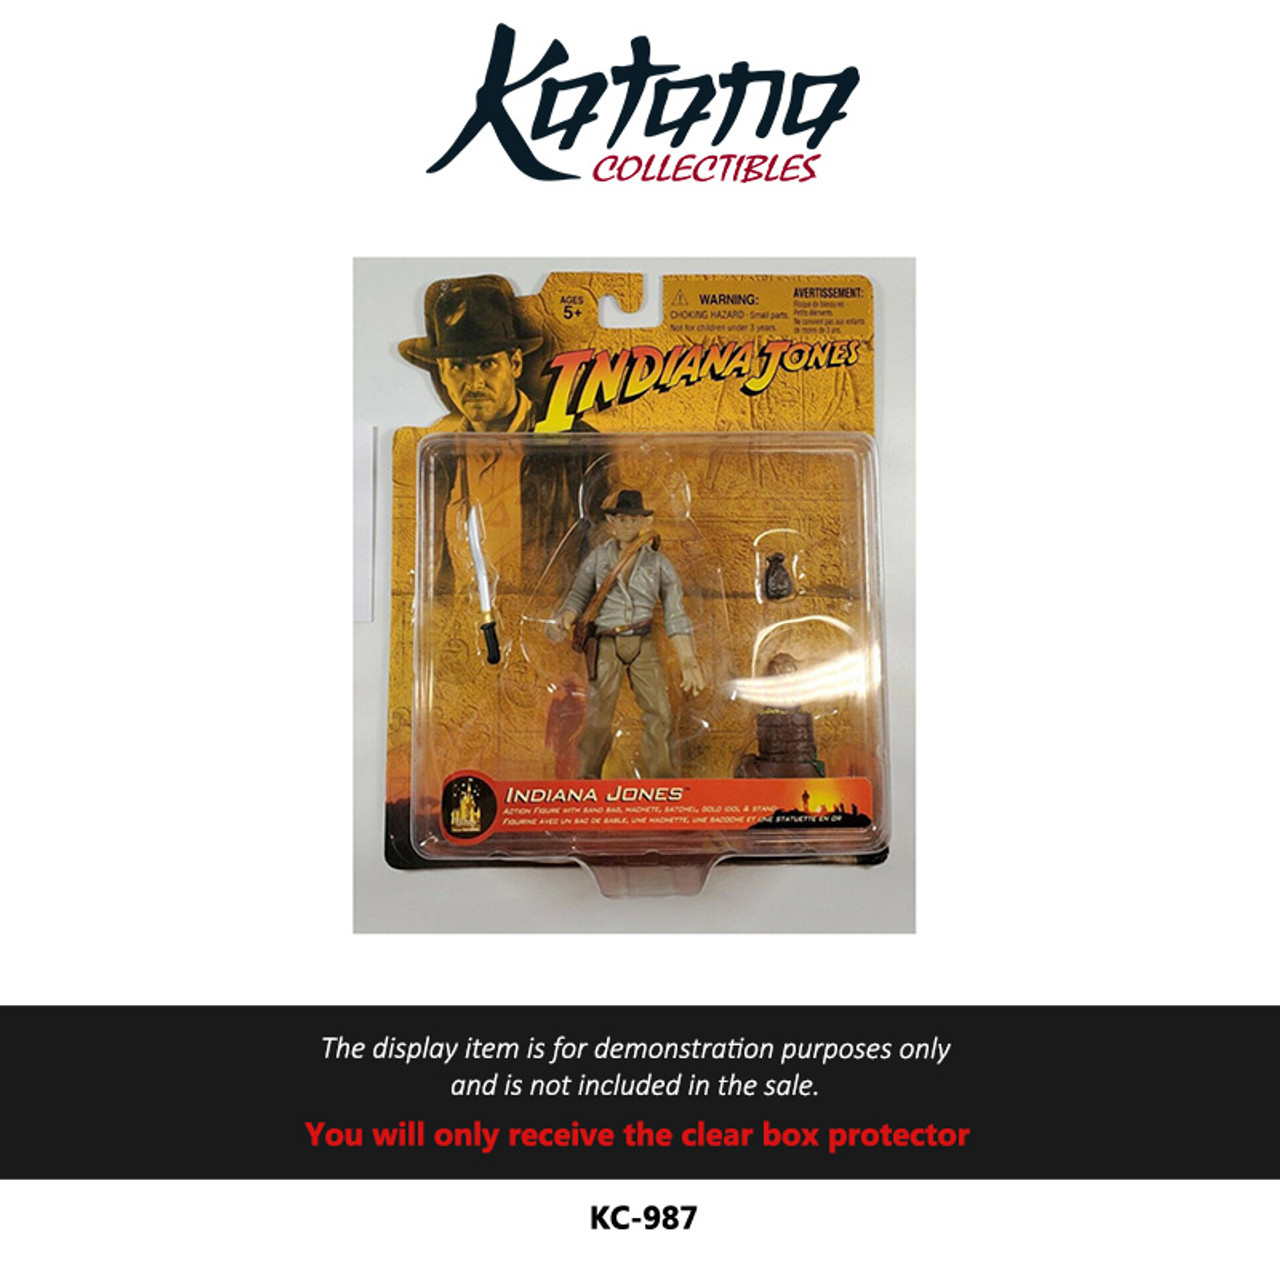 Katana Collectibles Protector For Indiana Jones Action Figure with Gold Idol and Accessories 2002 Disney Store